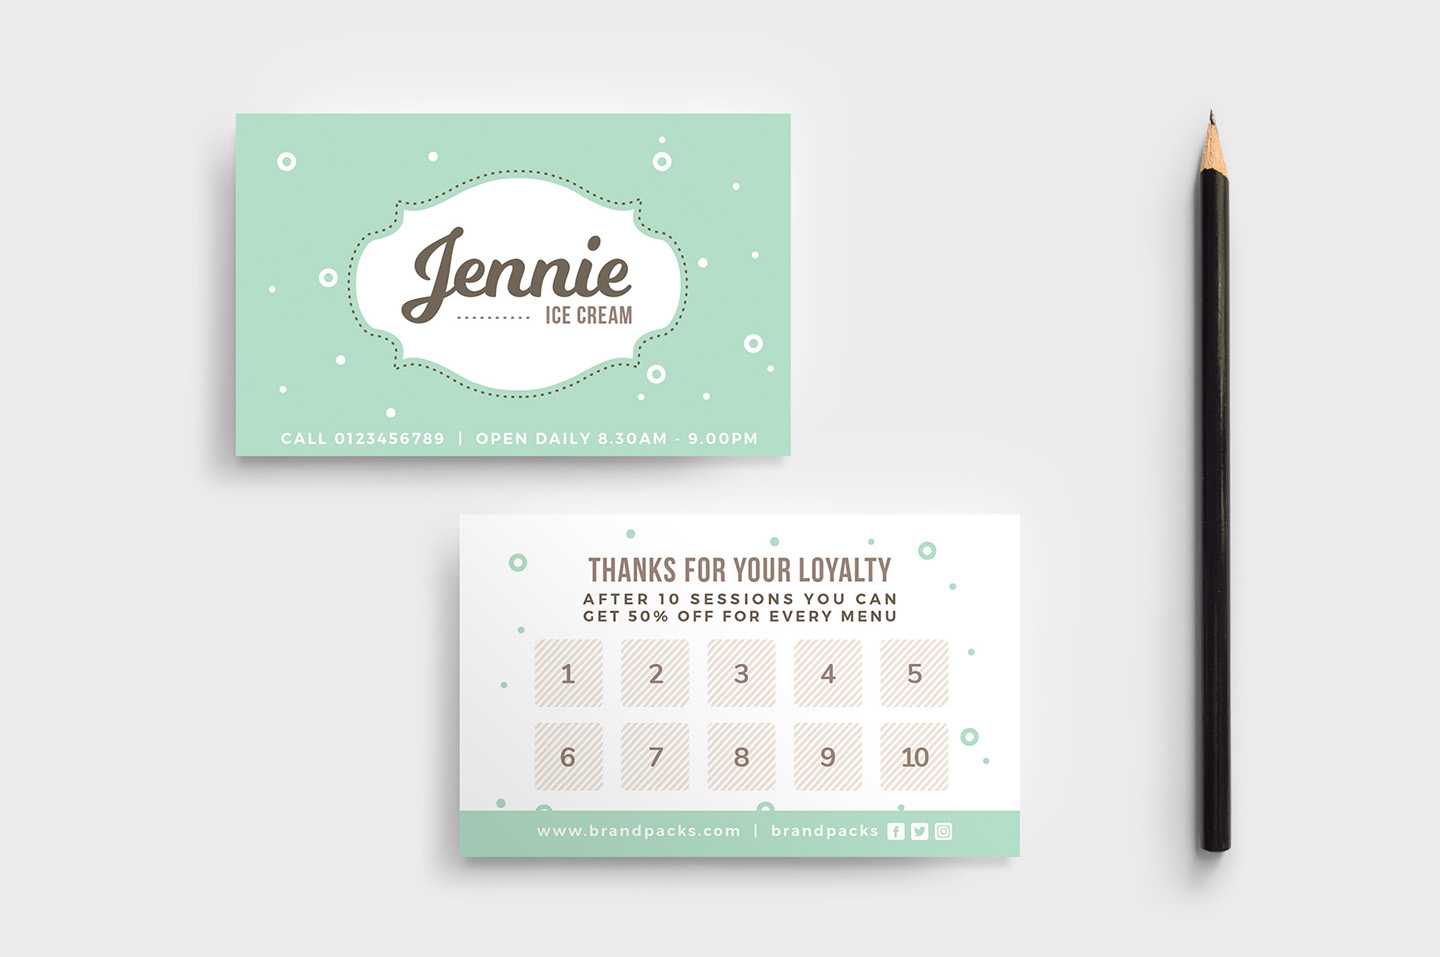 Free Loyalty Card Templates - Psd, Ai & Vector - Brandpacks Intended For Loyalty Card Design Template